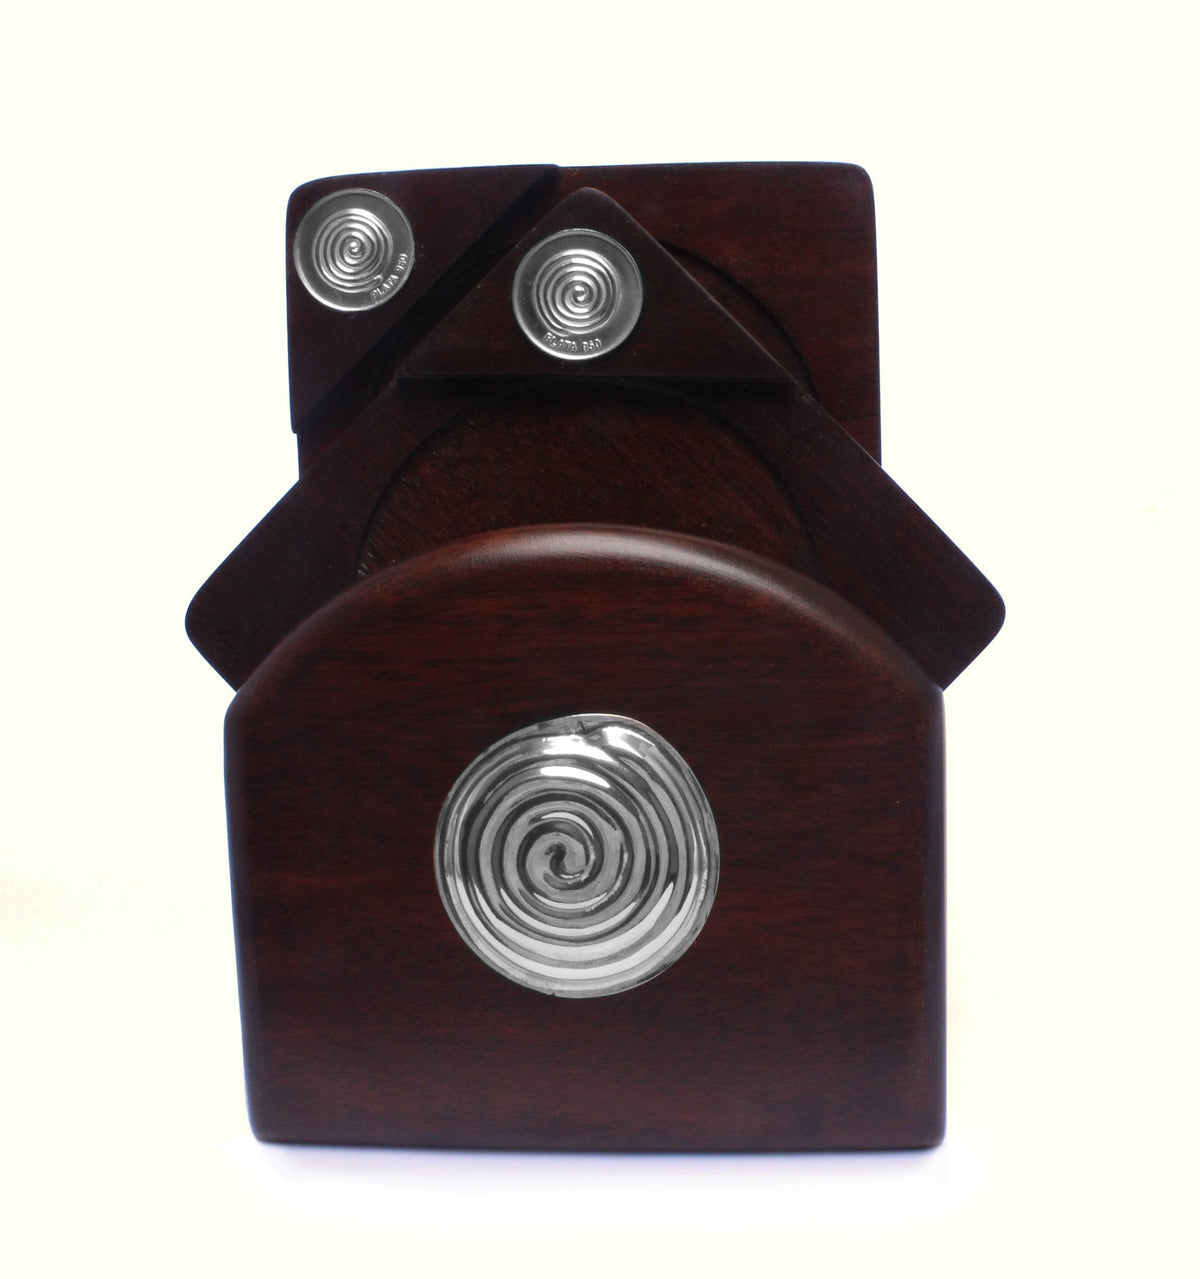 Mahogany Coasters with Sterling Silver SPIRAL Applique - Qinti - The Peruvian Shop